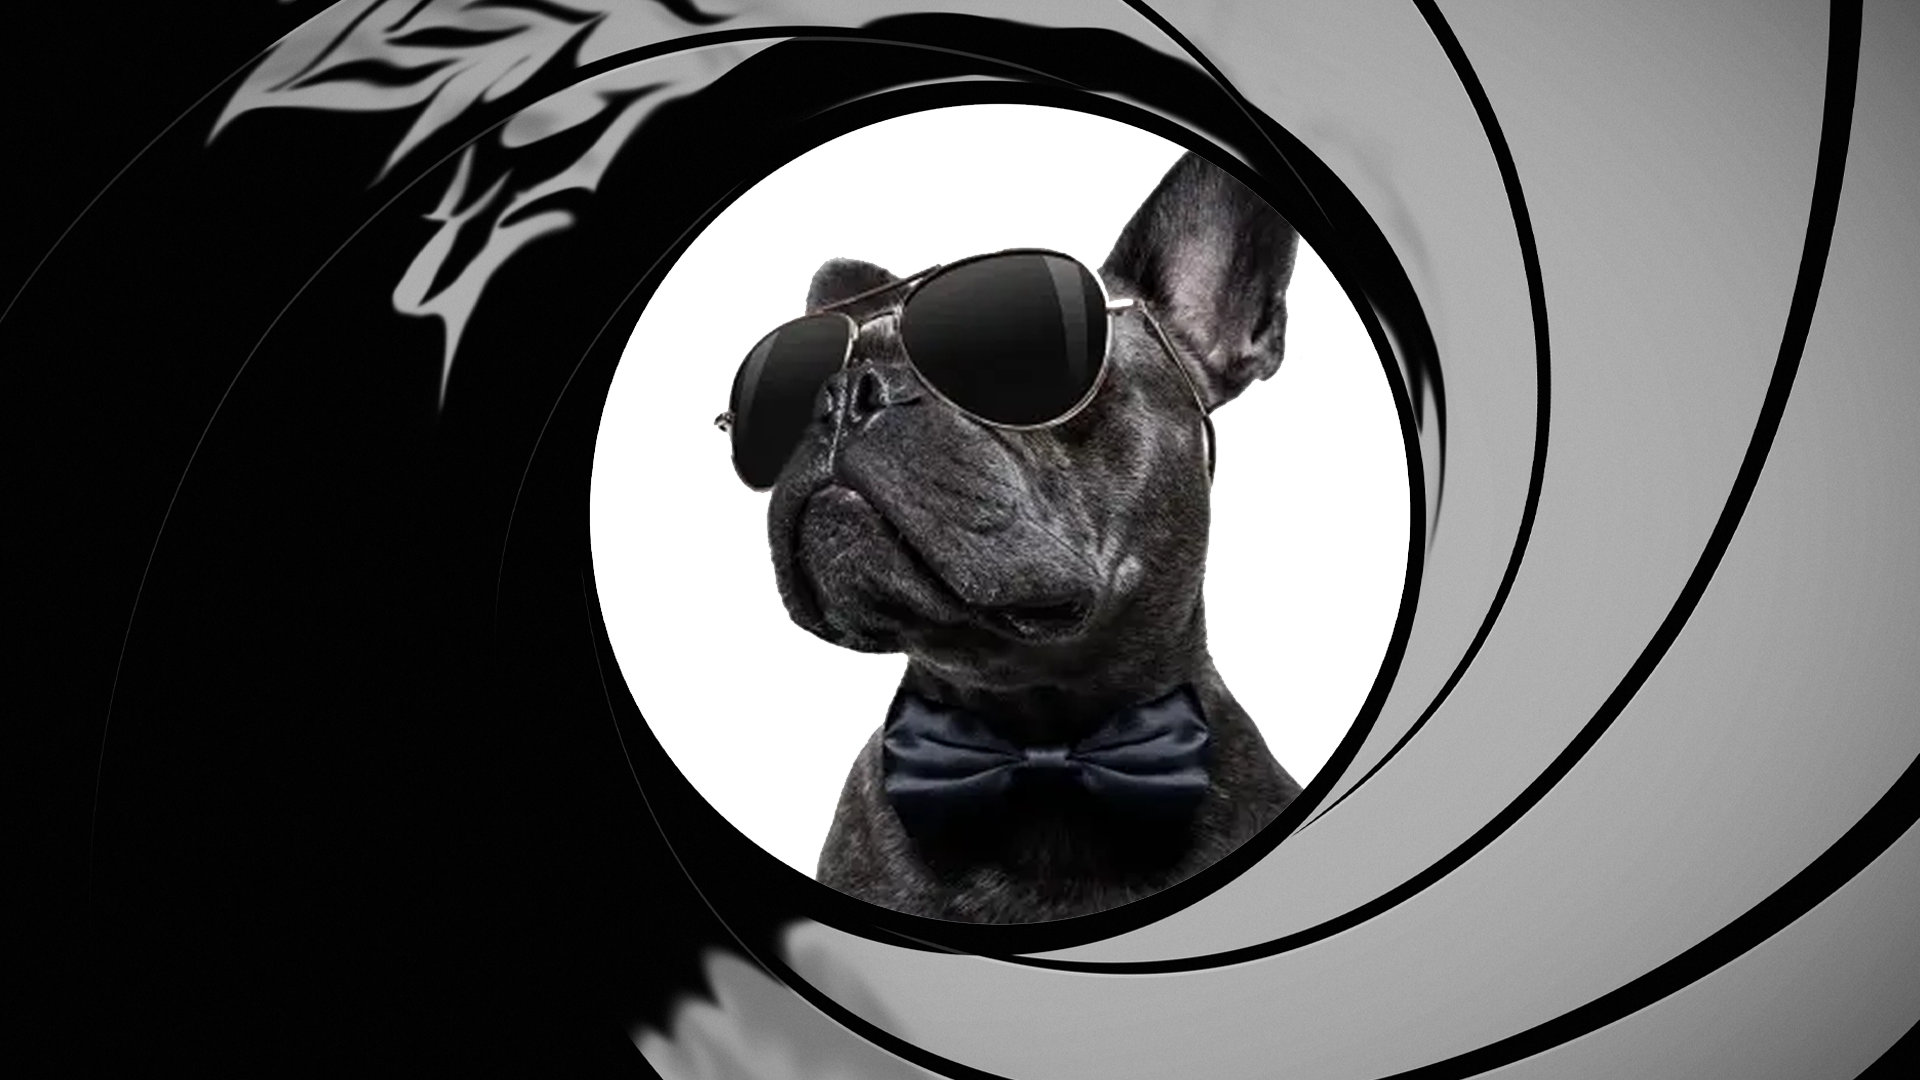 A spy dog in sunglasses and bowtie